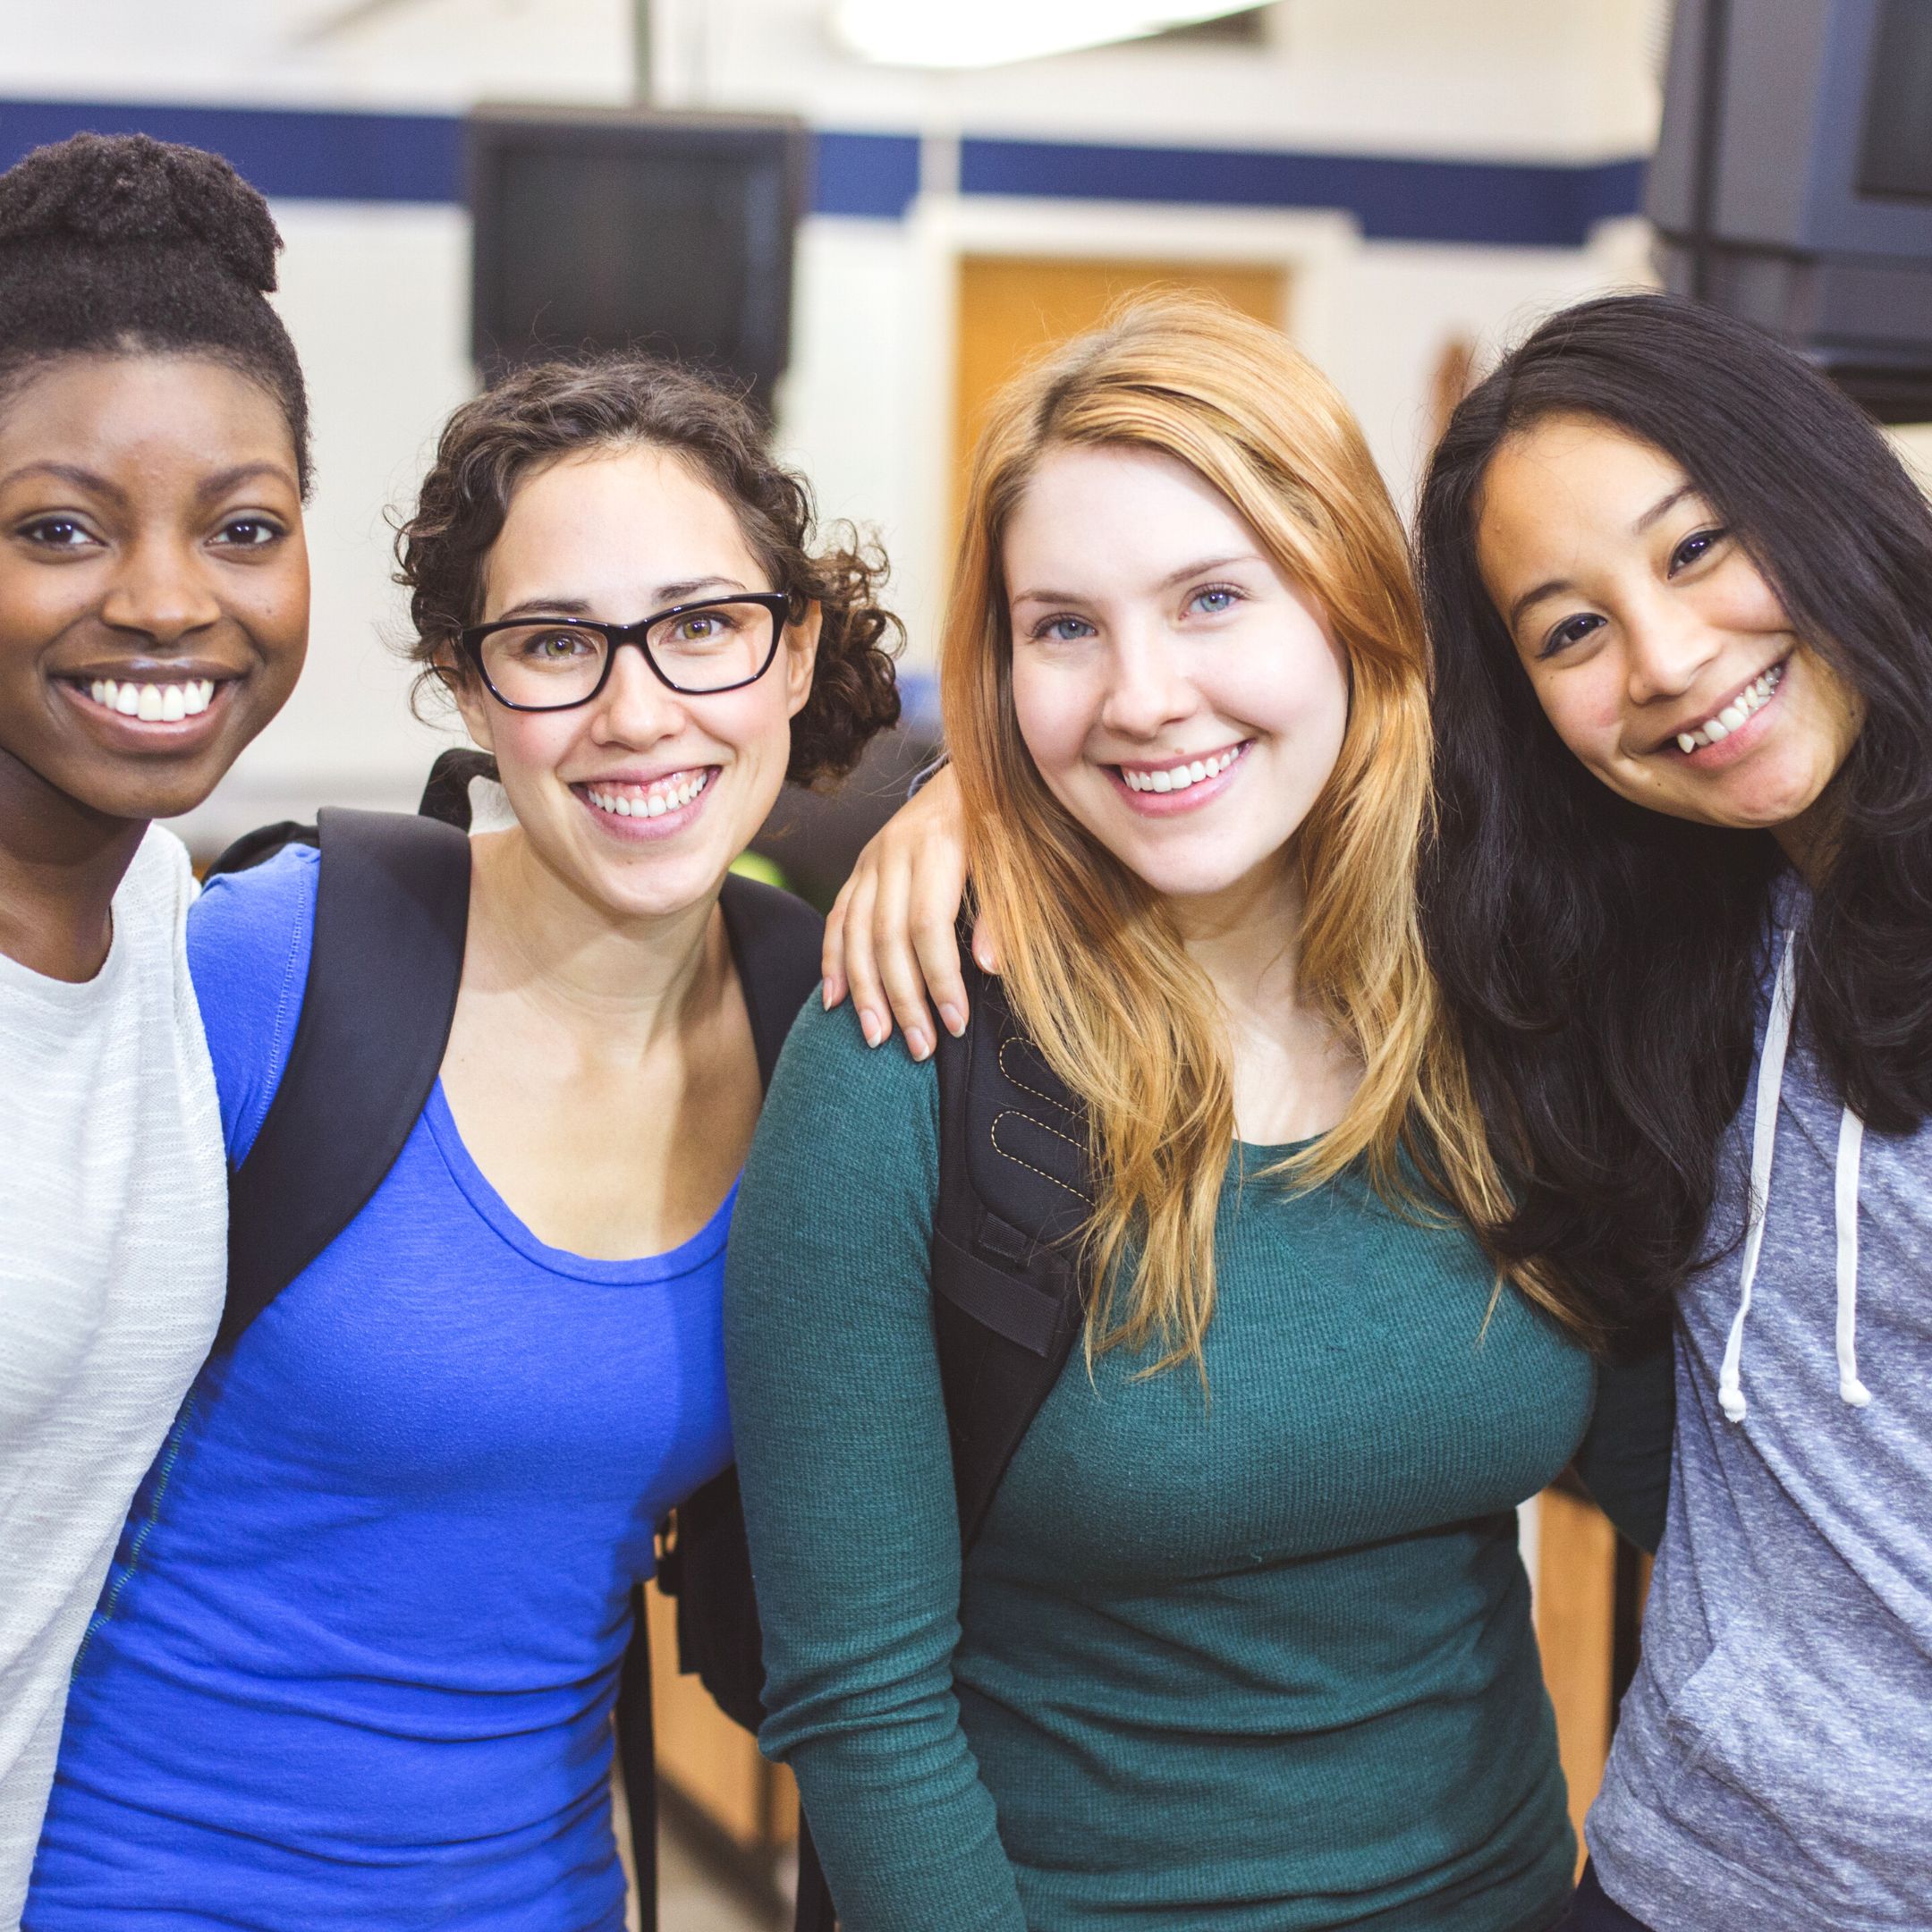 A group of young women wearing backpacks stand together, posing for a photo. High school students can participate in Youth@Work.